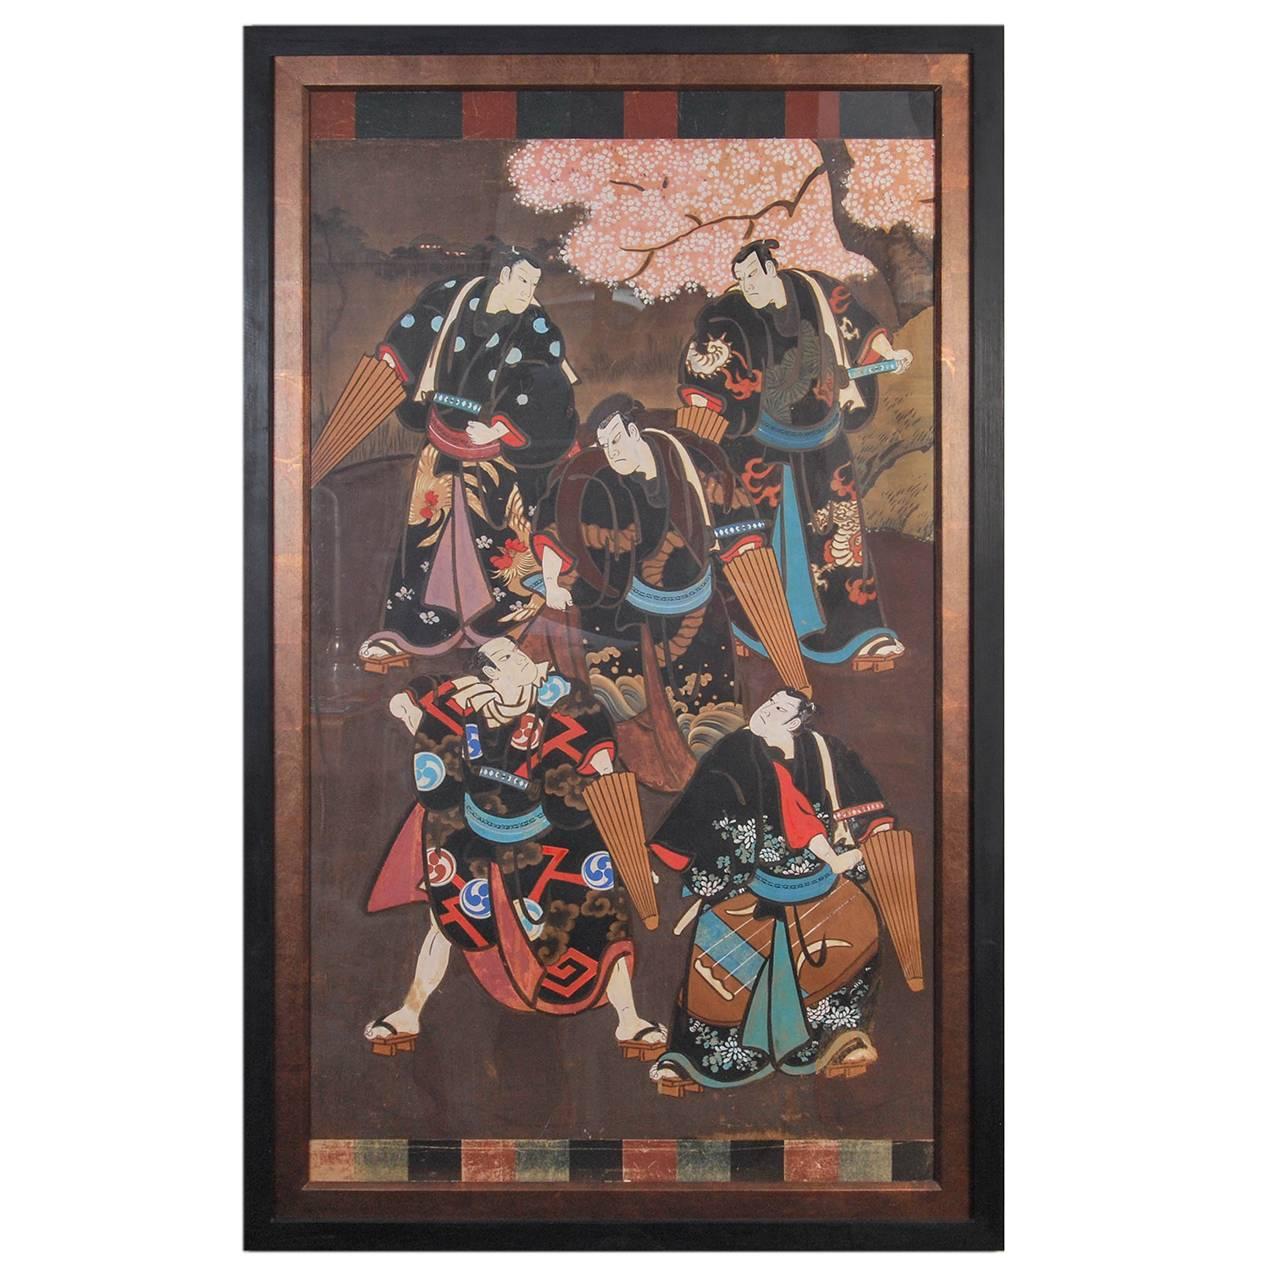 Rare pair of Japanese Kamigata-e, 'kabuki' theatre posters with hand-painted depictions of famous kabuki actors in elaborate classical costume highlighted by vibrant mineral colours, Meiji period, late 19th century.

These signboards show a scene